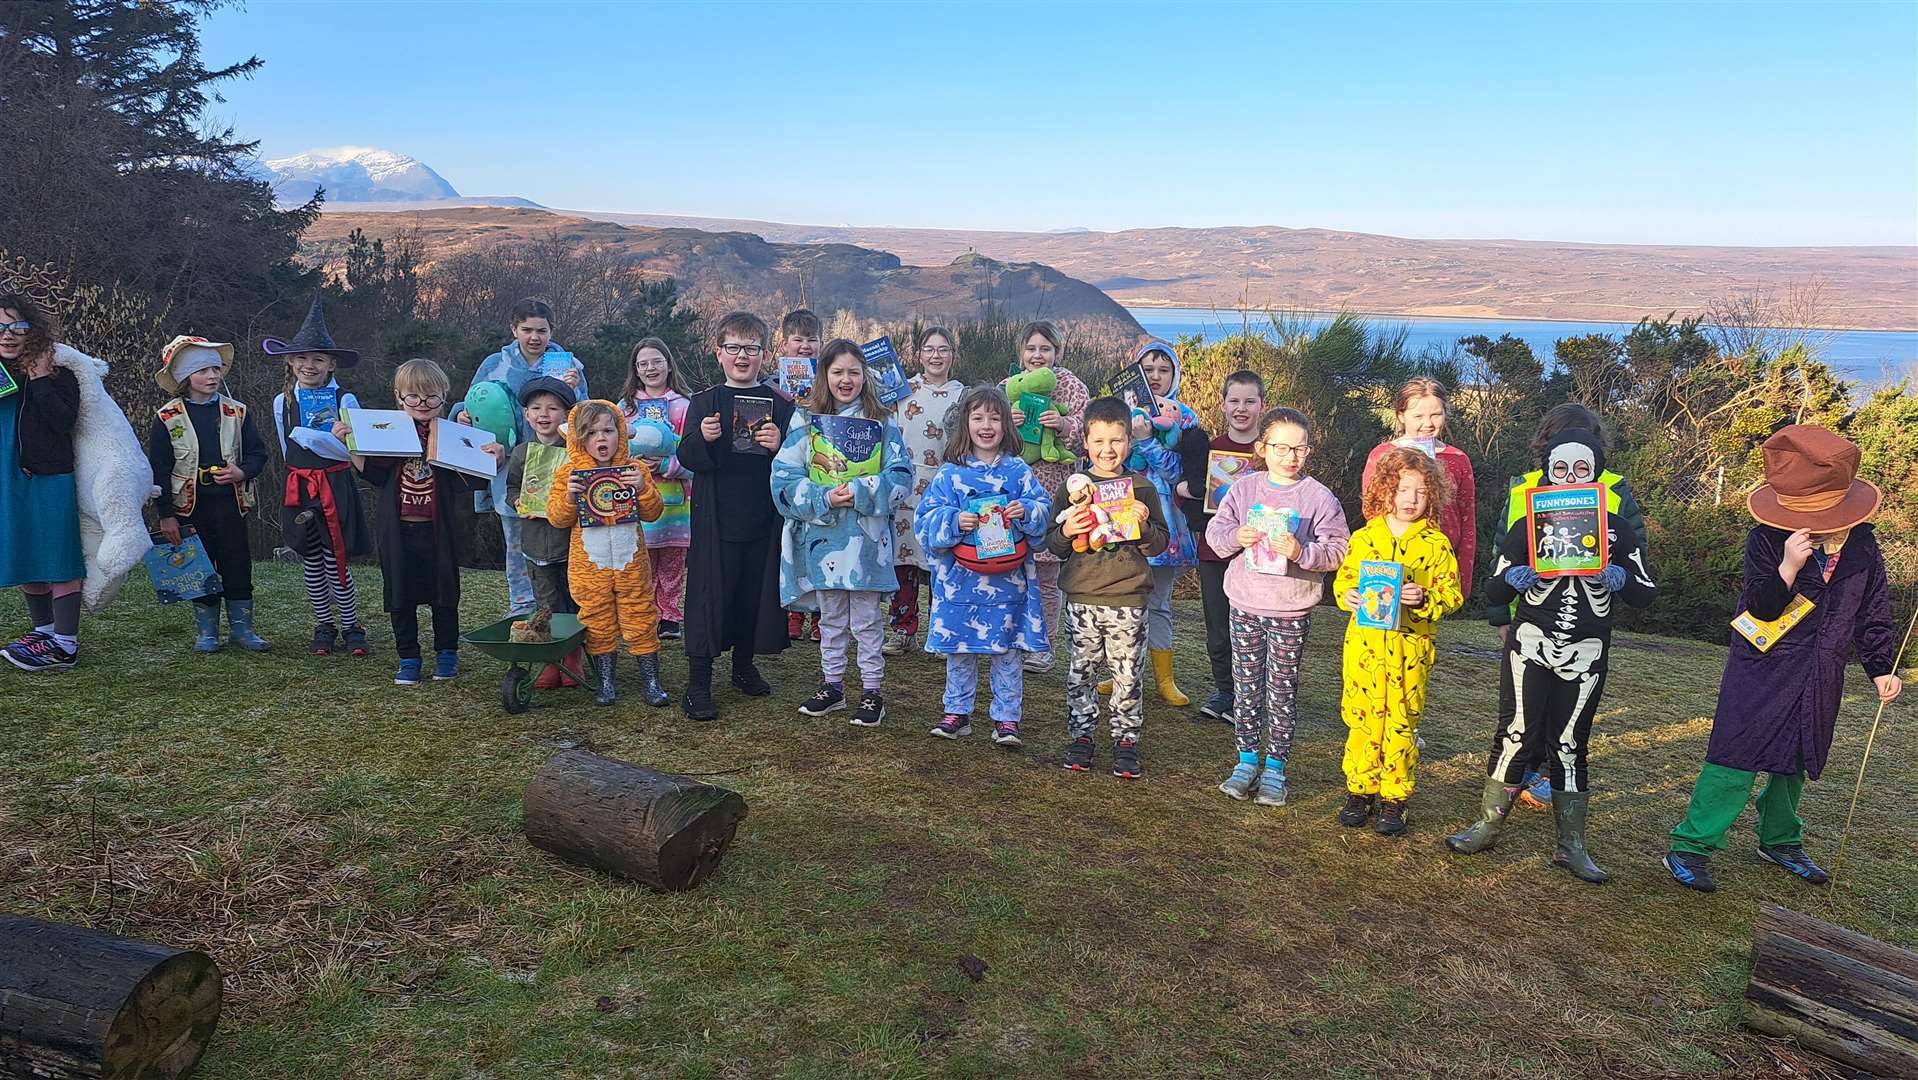 Pupils at Tongue Primary School enthusiastically celebrated World Book Day on Thursday by dressing up as characters from their favourite books.